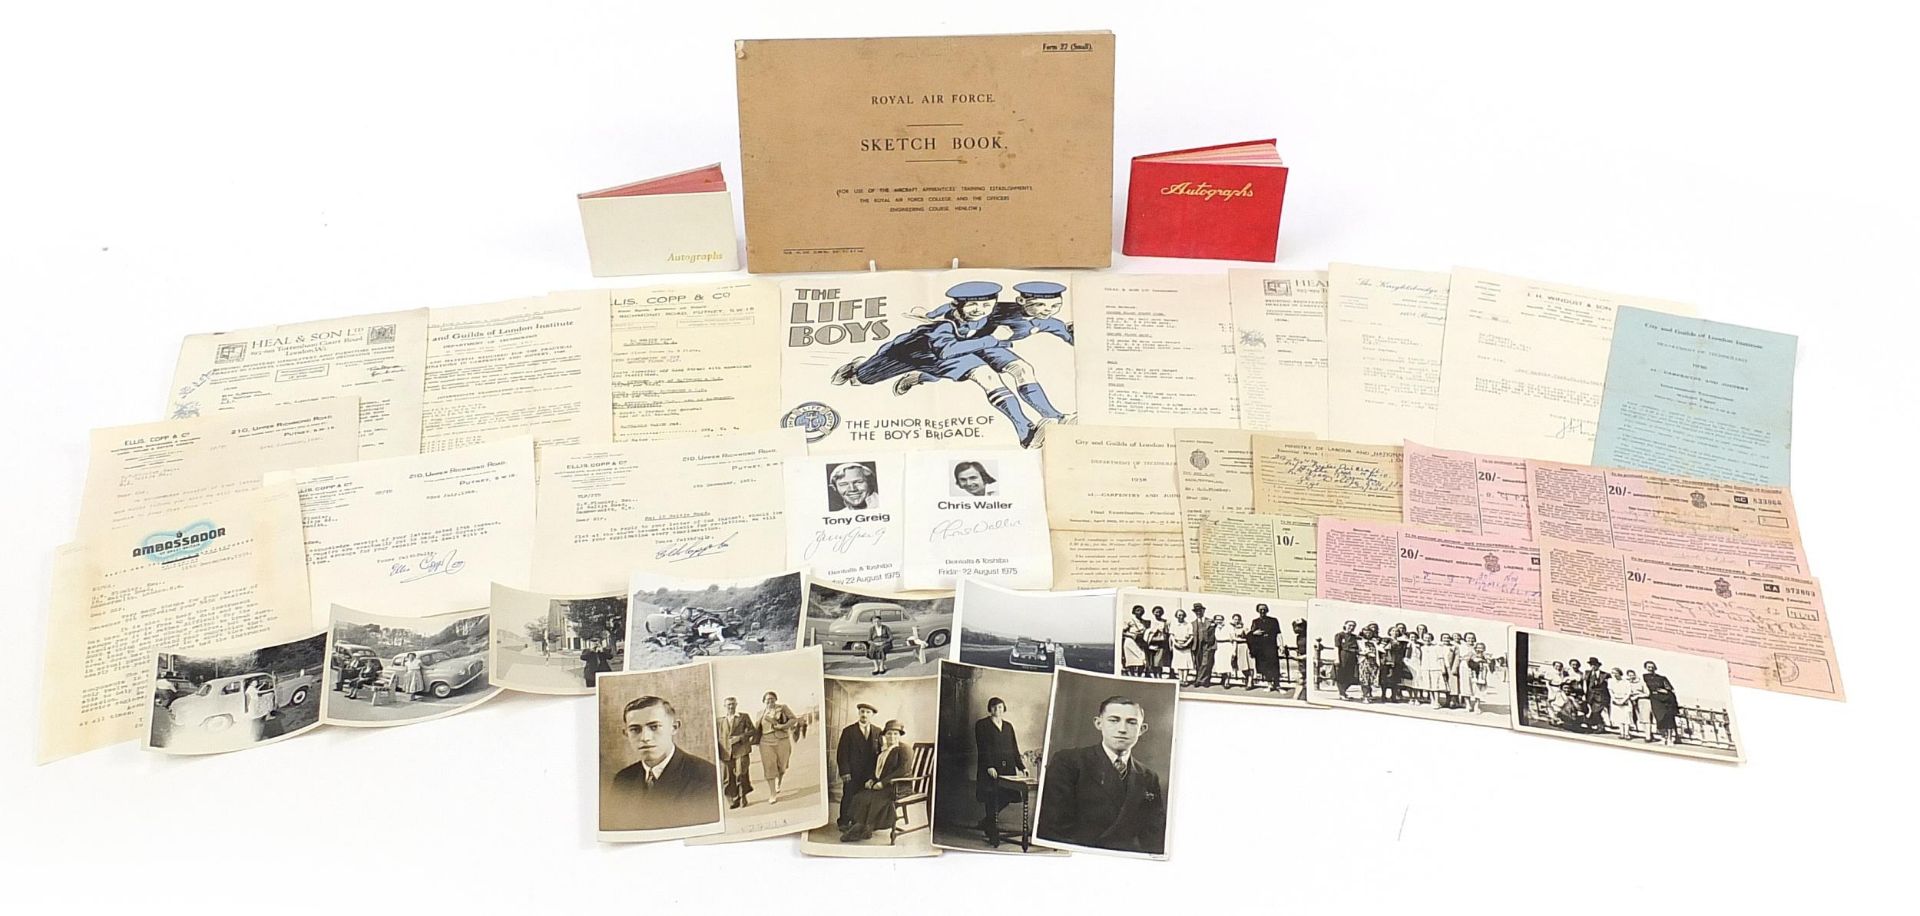 Ephemera including The Lifebuoys advertising poster, Heal & Son letter, Royal Air Force sketch